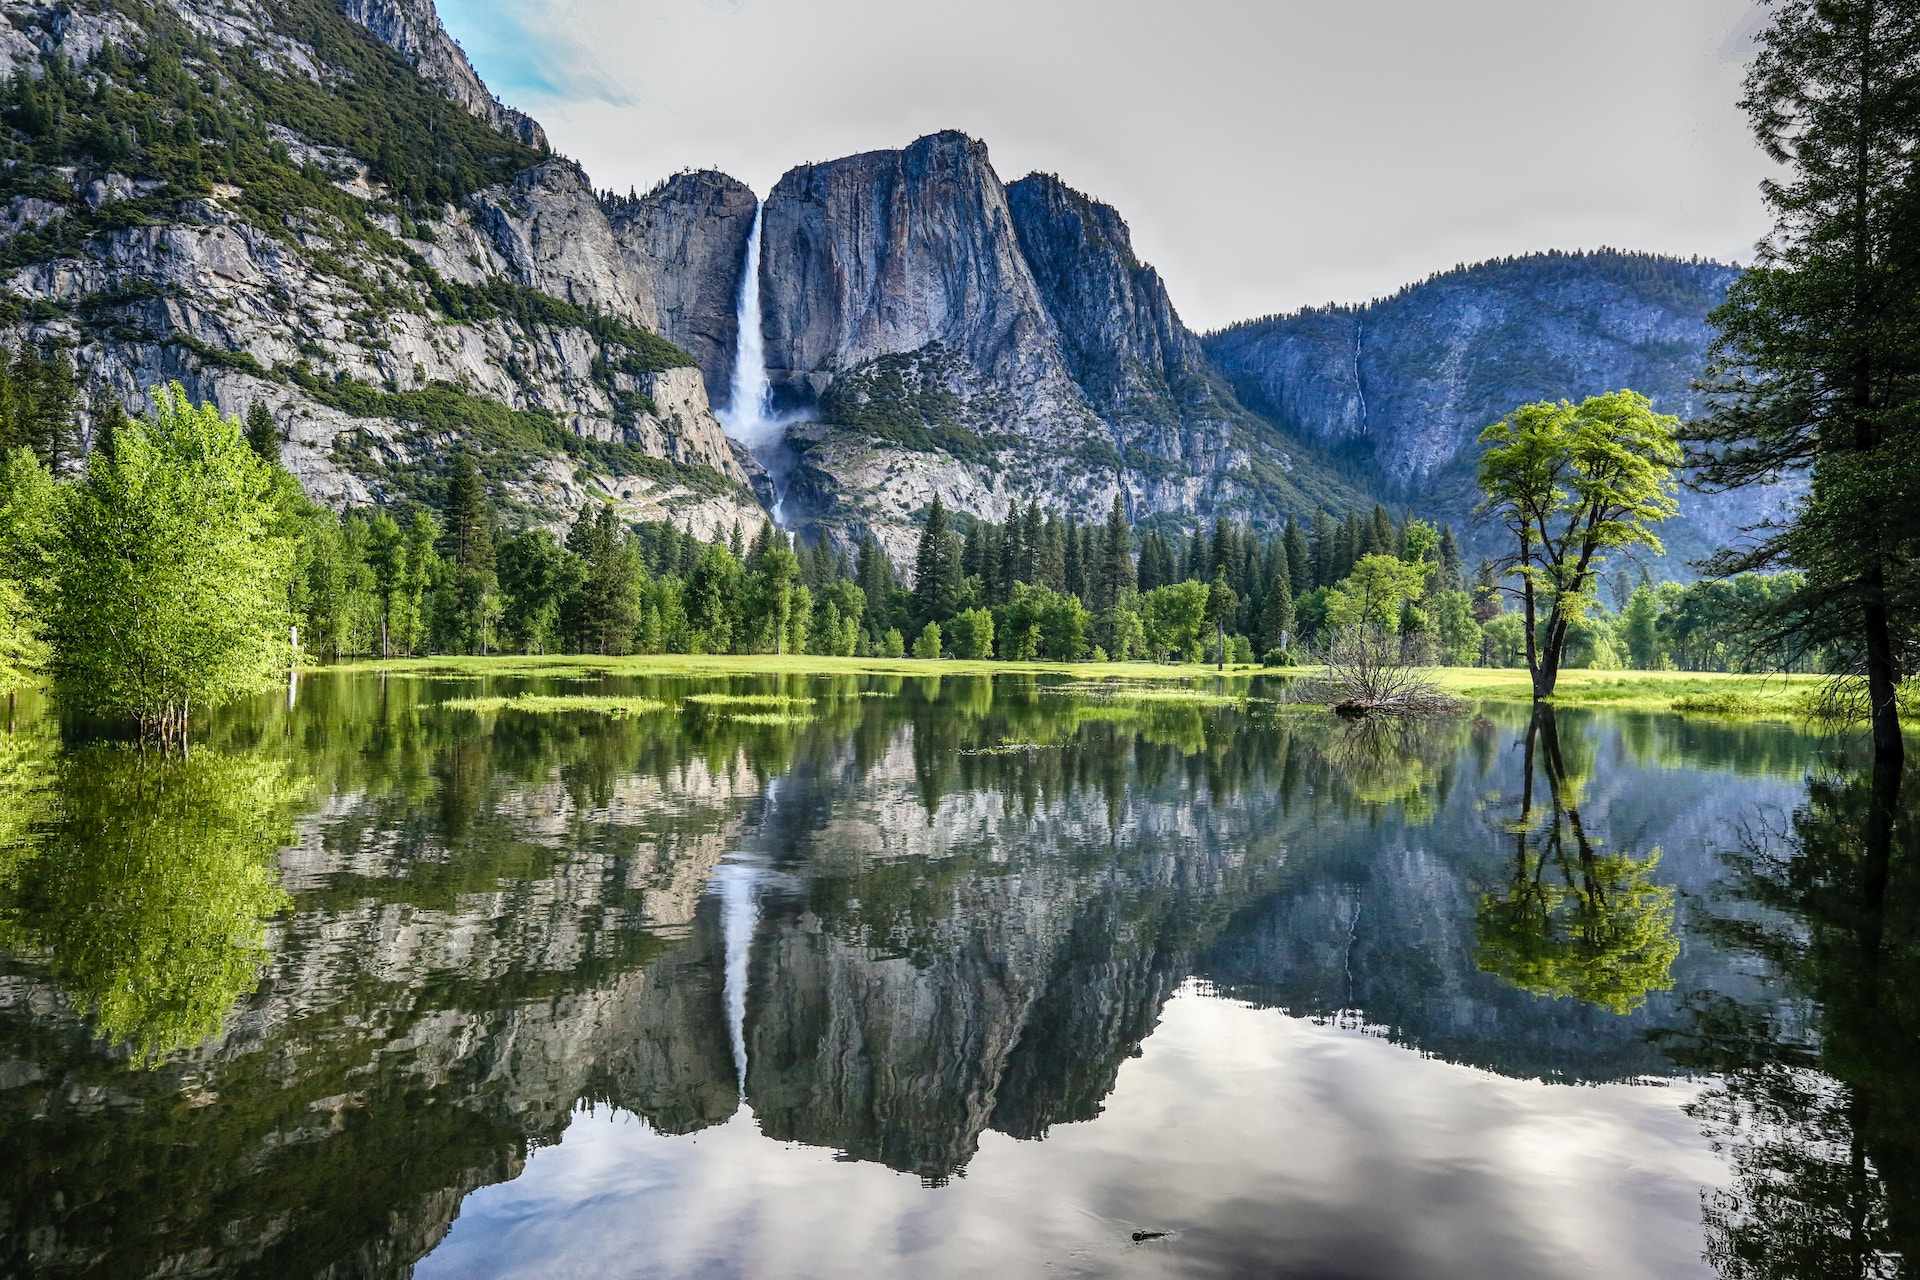 How to Avoid the Crowds at Yosemite National Park